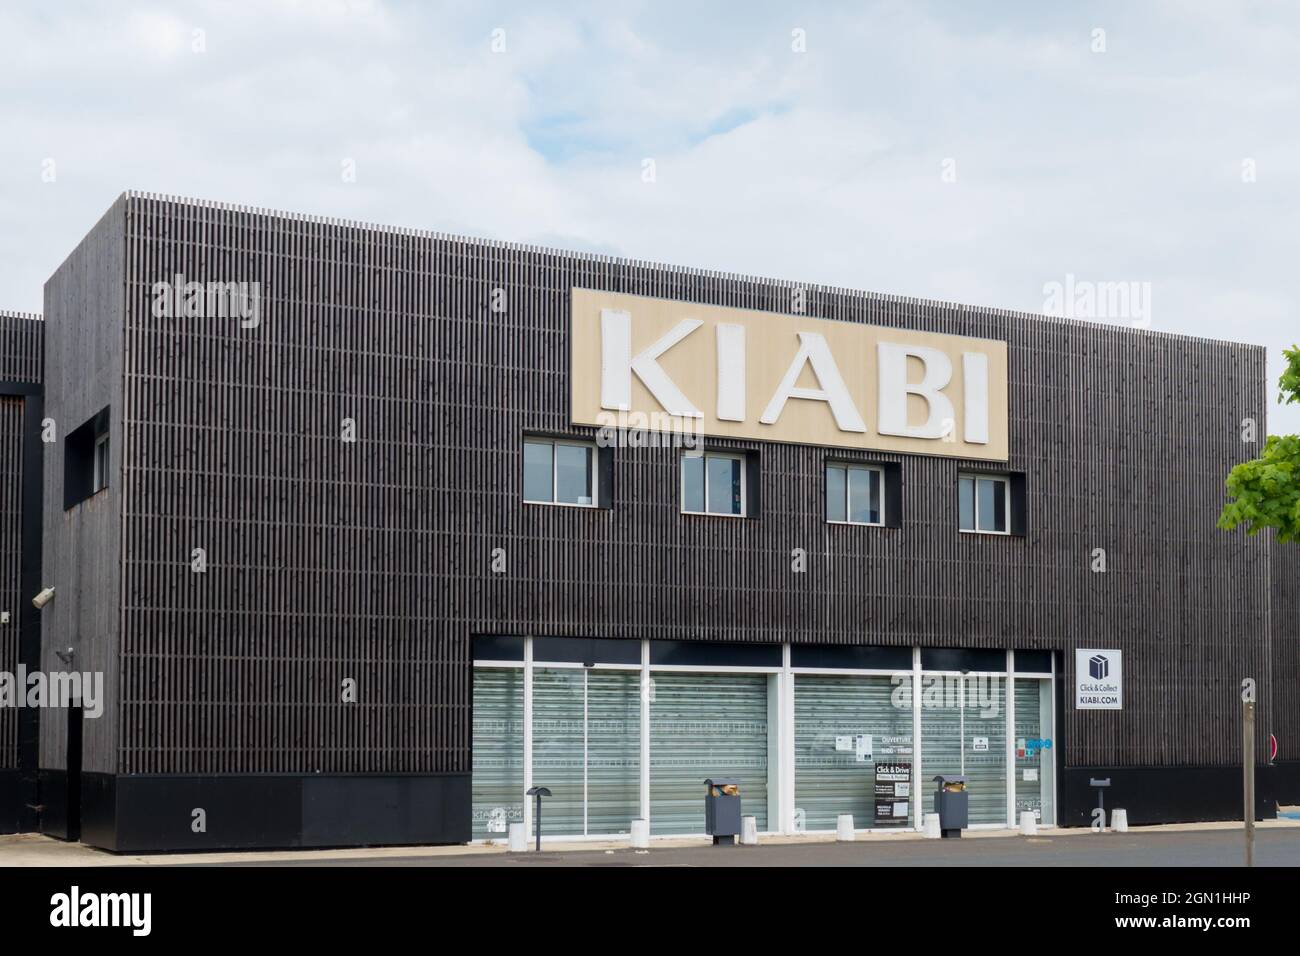 FLECHE, FRANCE - Jul 28, 2021: a  Facade of french Shop with brand signage KIABI is famous brand for clothes Stock Photo